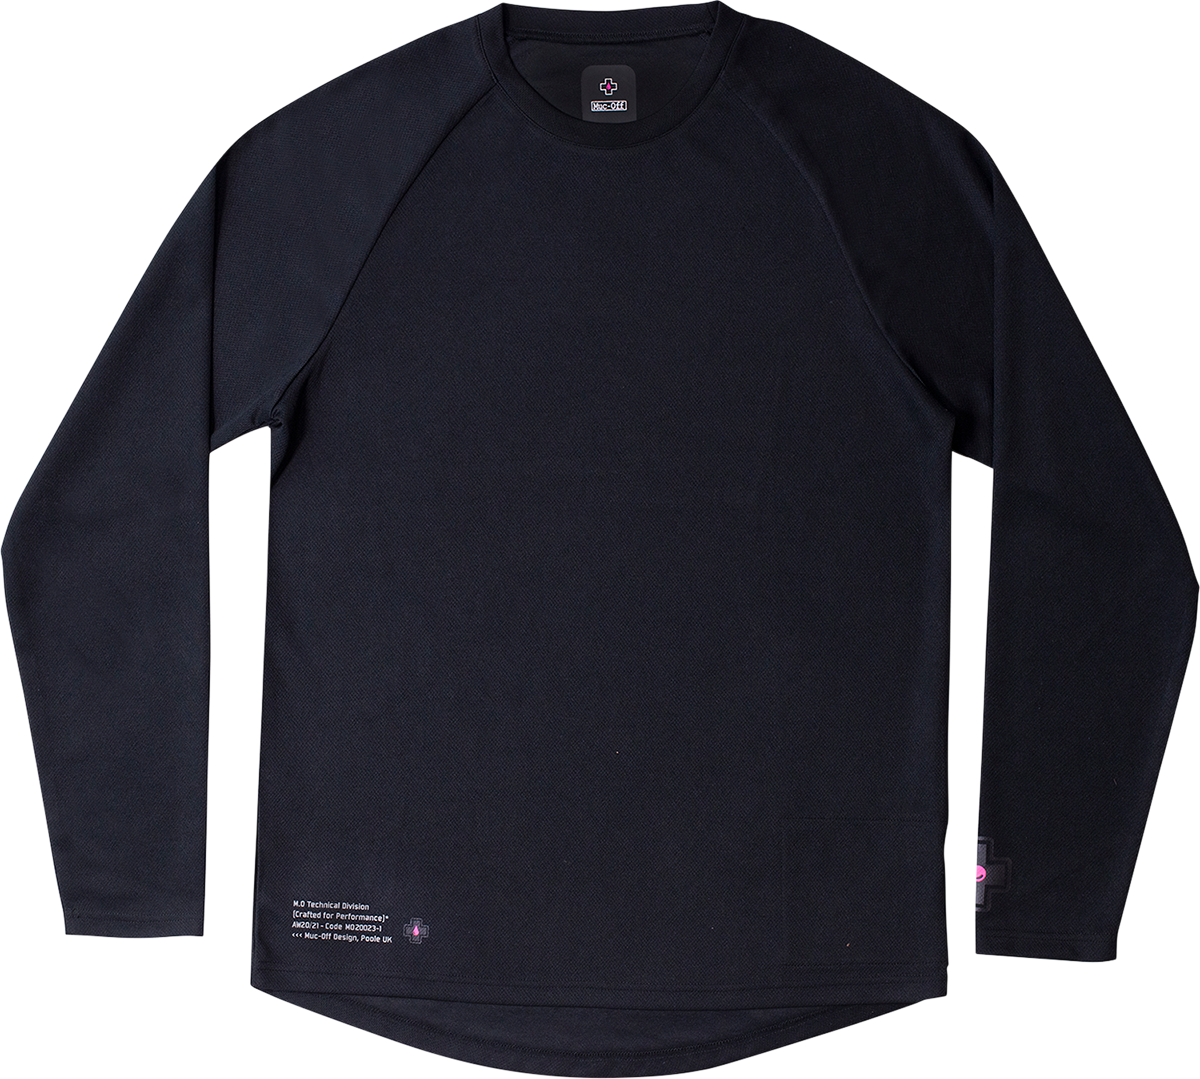 Riders Long-Sleeve Jersey - Black - Large